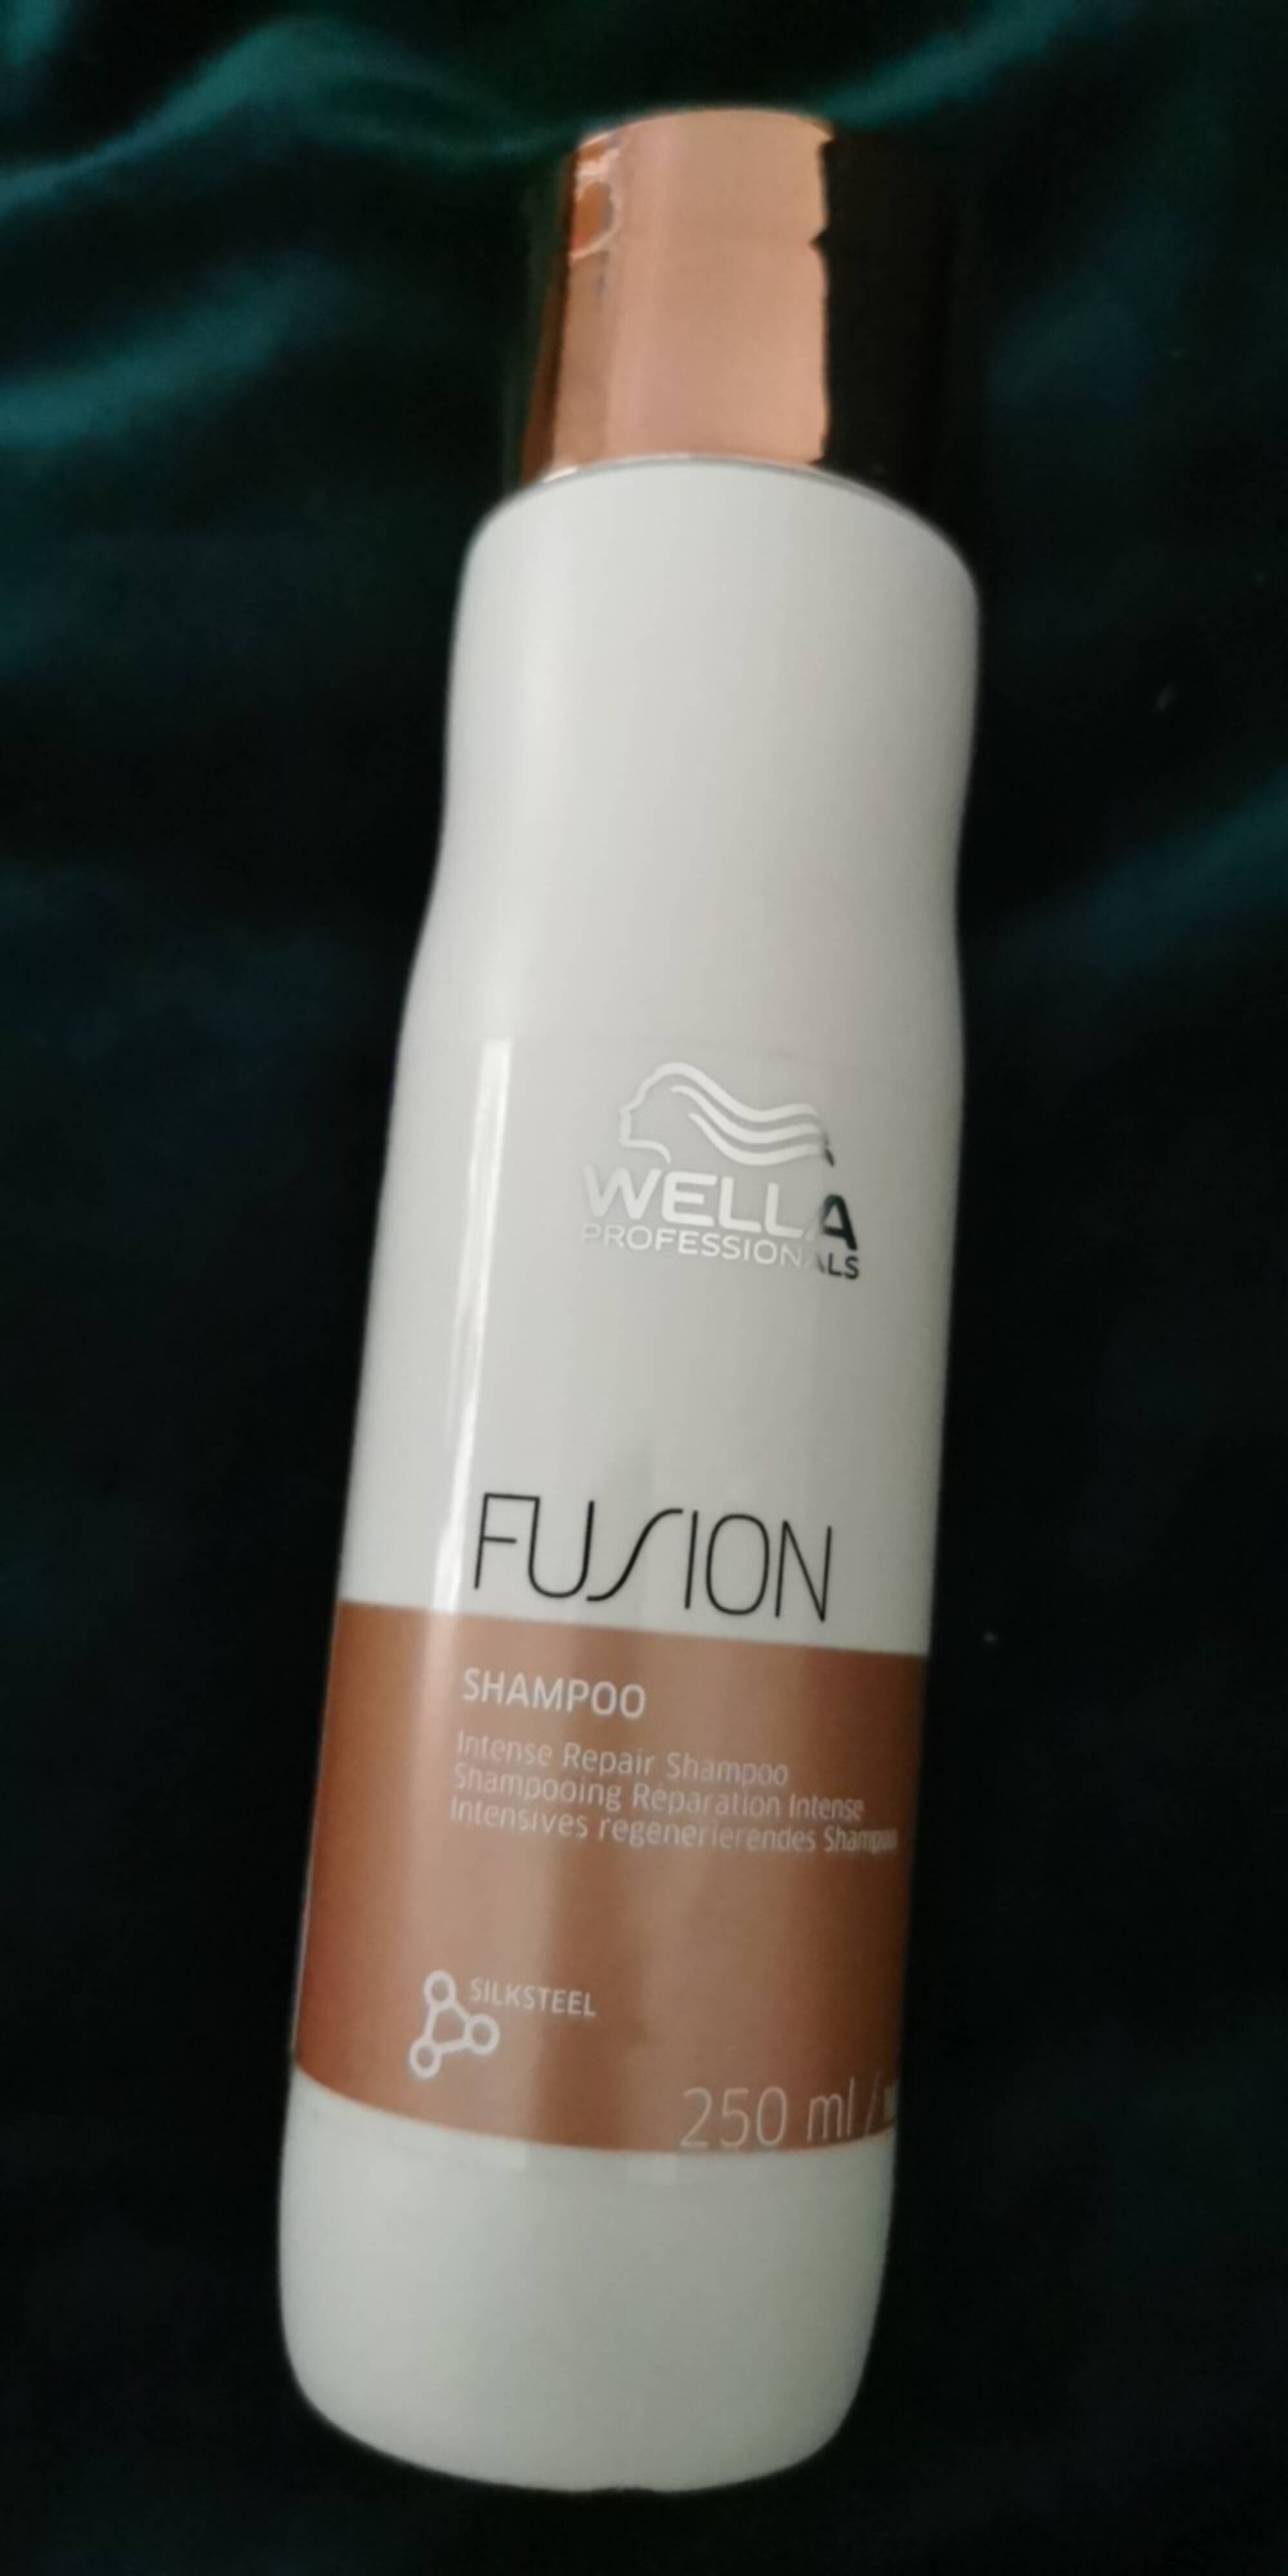 WELLA PROFESSIONALS - Fusion - Shampooing réparation intense